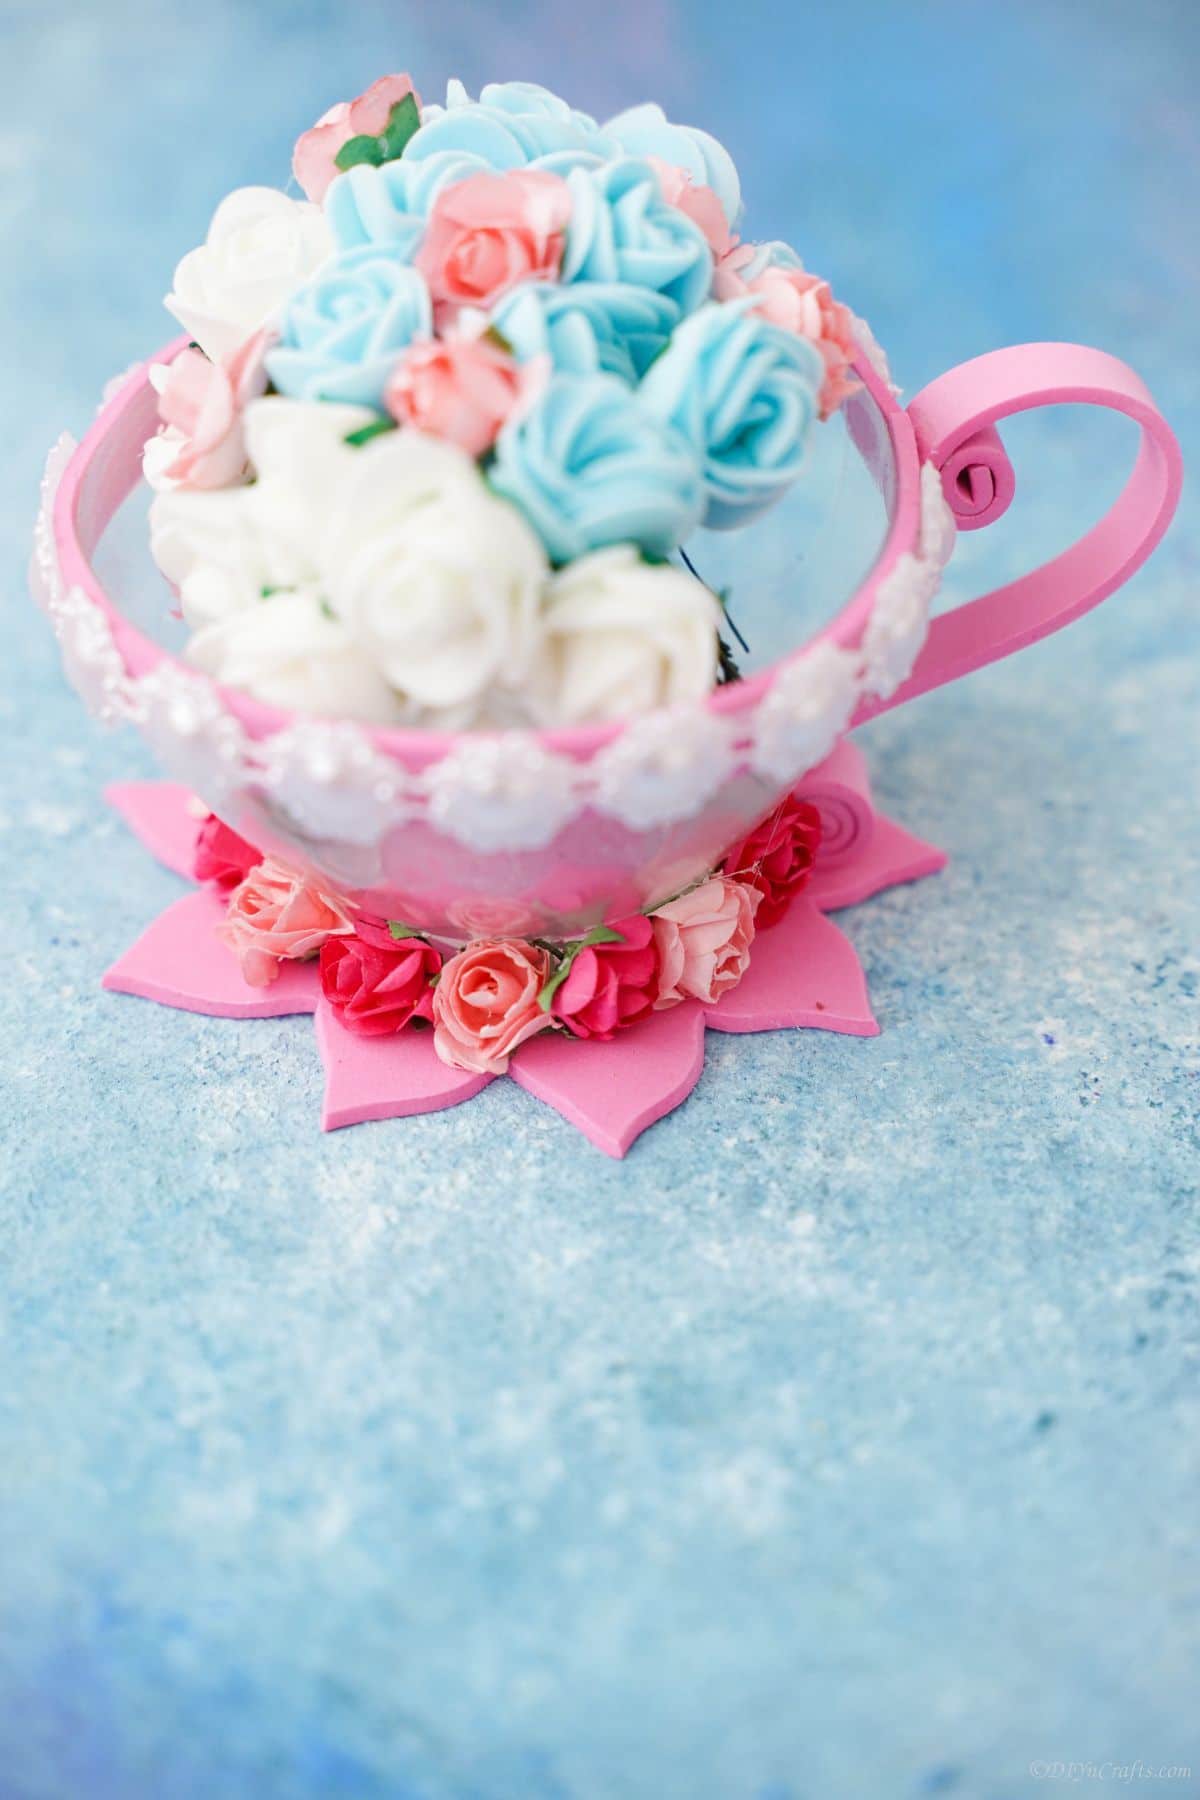 light blue paper under pink and white teacup holding blue and white mini roses